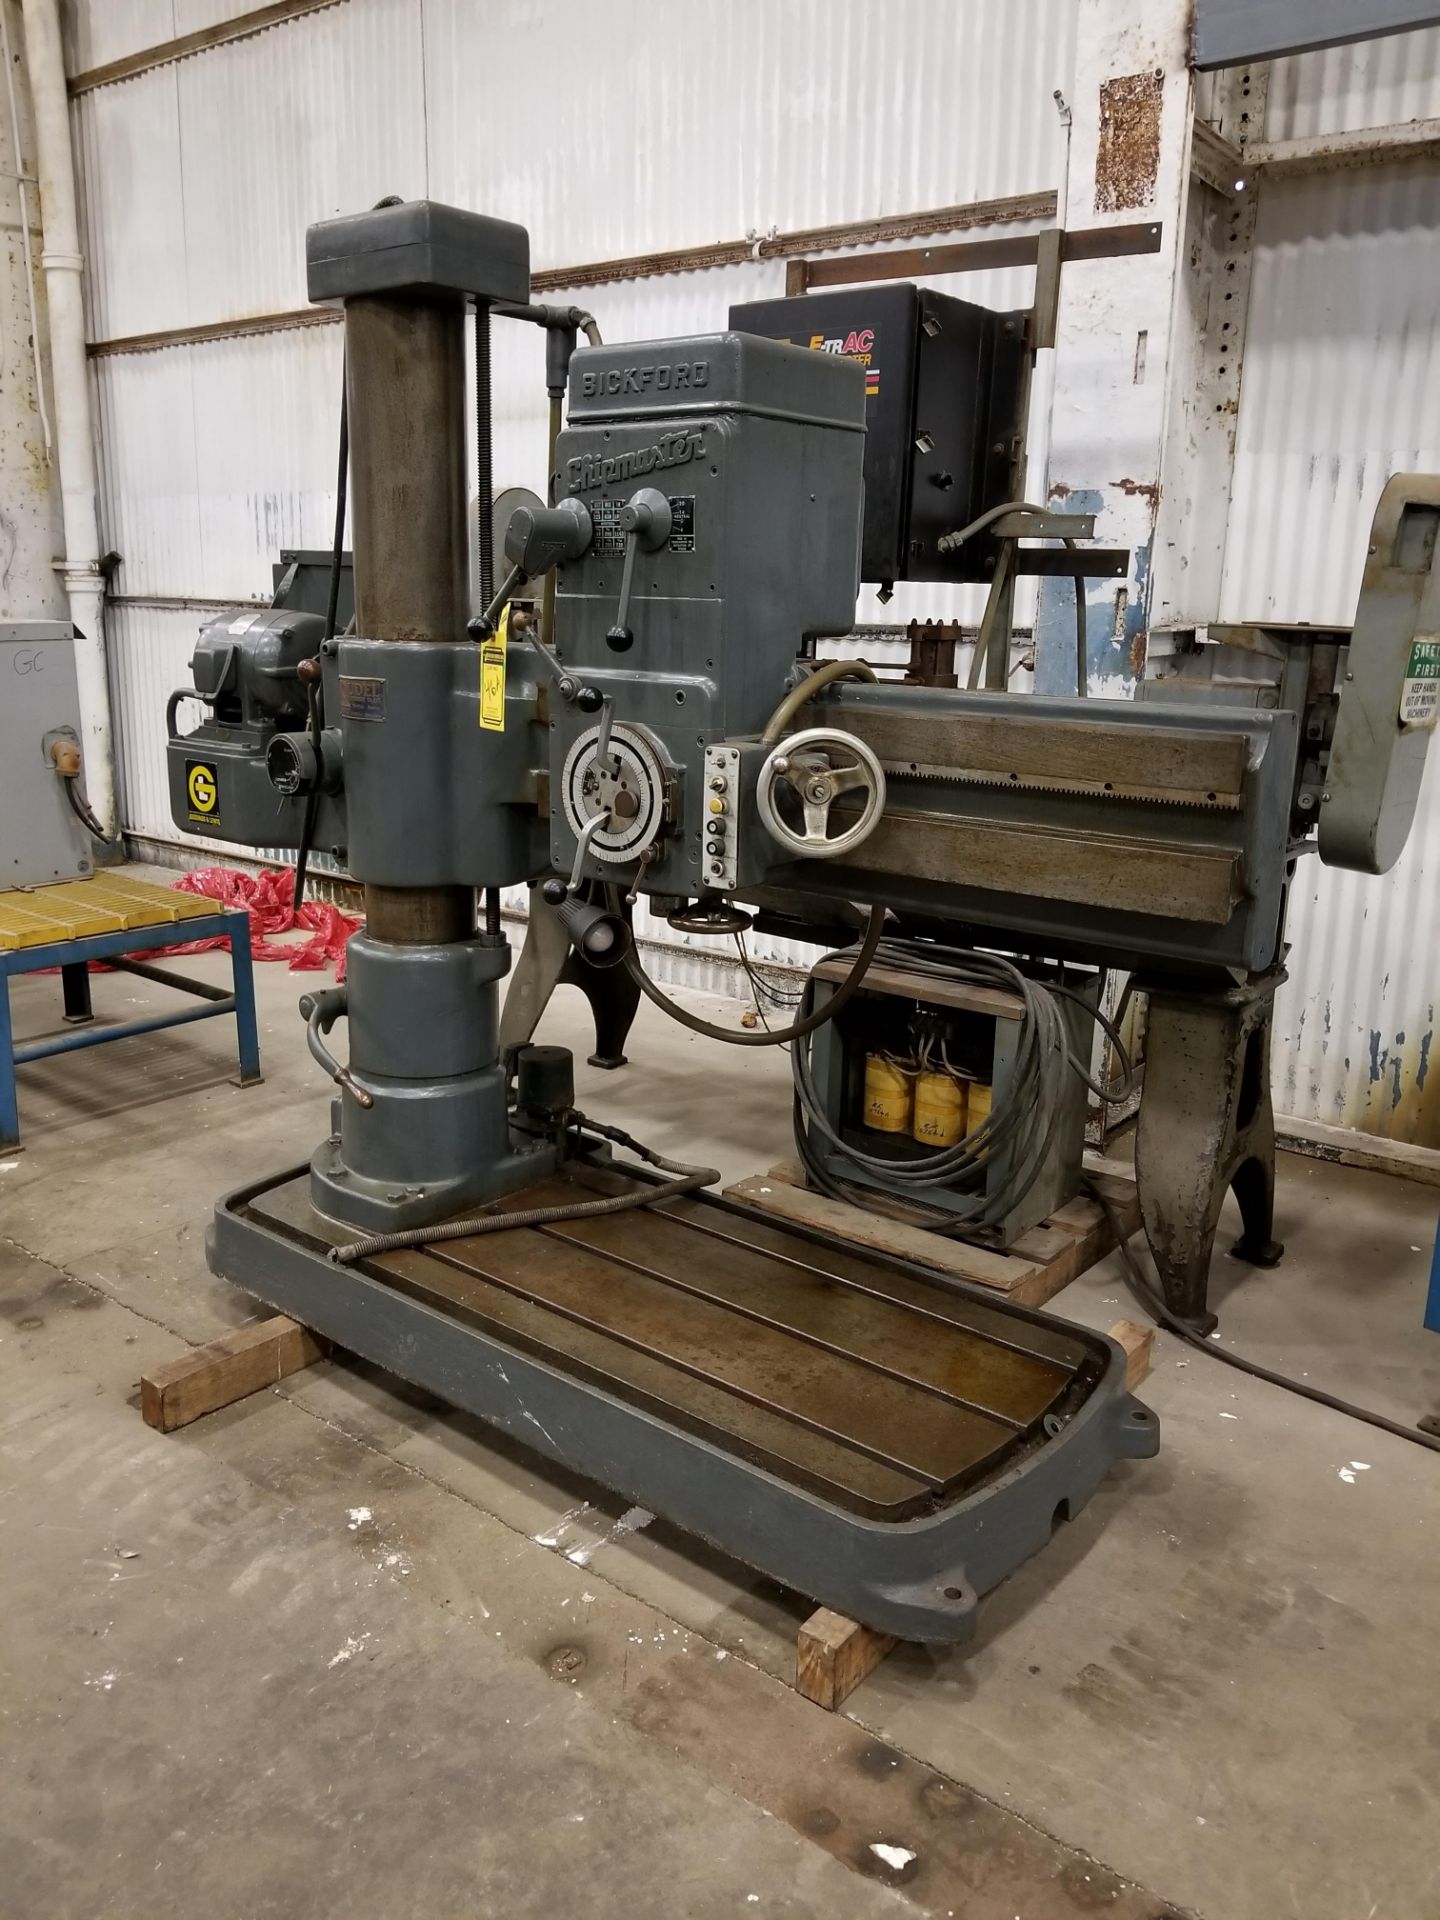 GIDDINGS & LEWIS RADIAL ARM DRILL, CHIPMASTER POWER CARRIAGE HEAD, 99-1800 RPM, ADJUSTABLE TO 5'' - Image 2 of 4